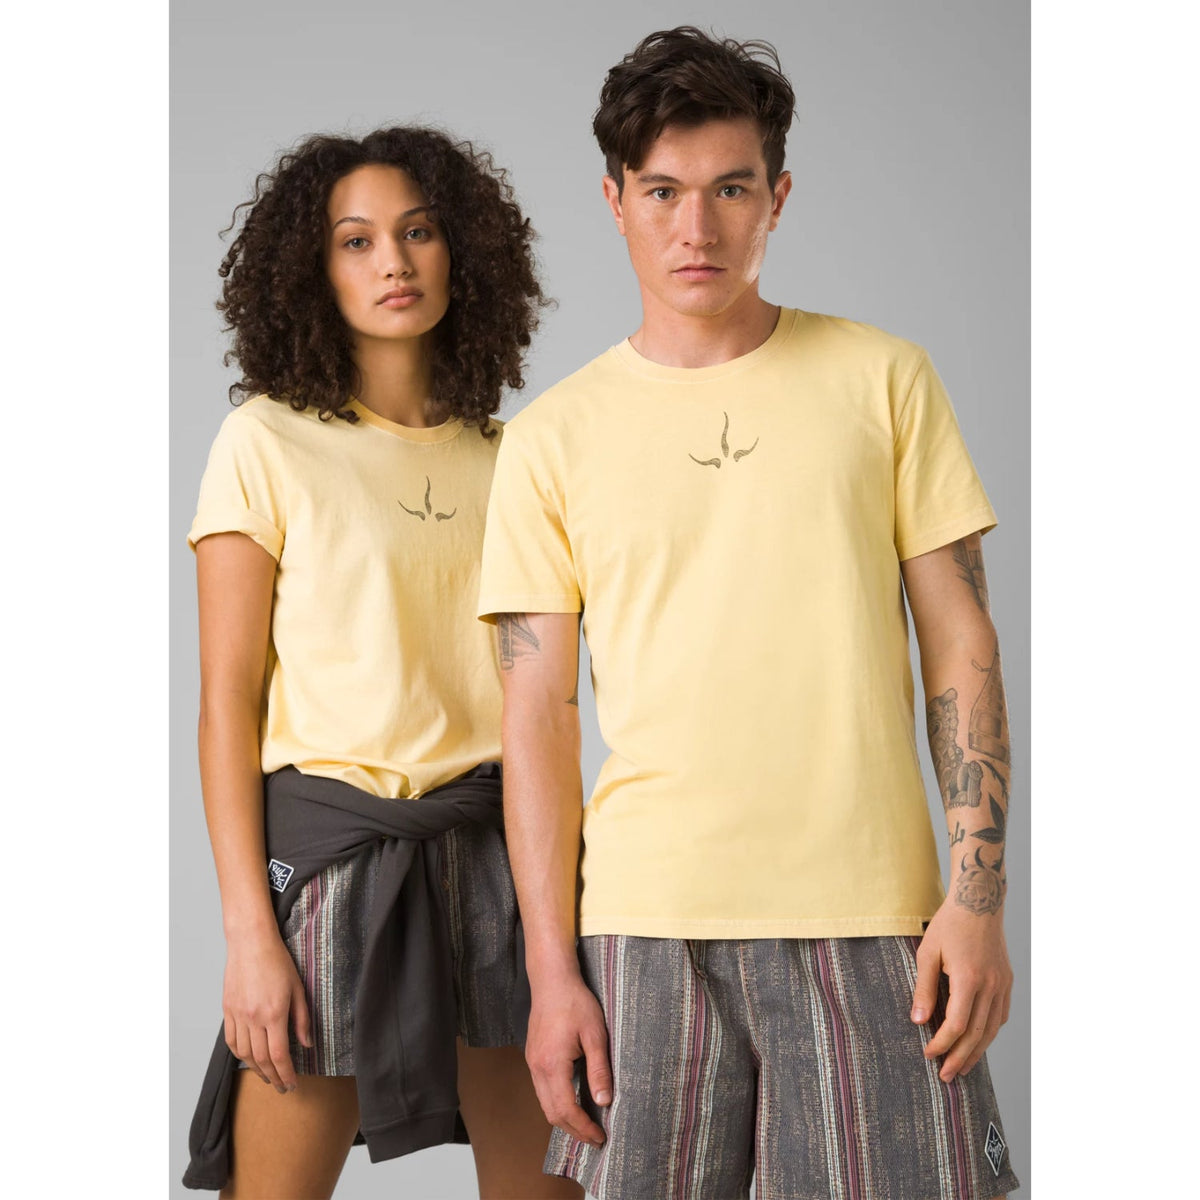 Prana Heritage Graphic T-Shirt in washed sun colour